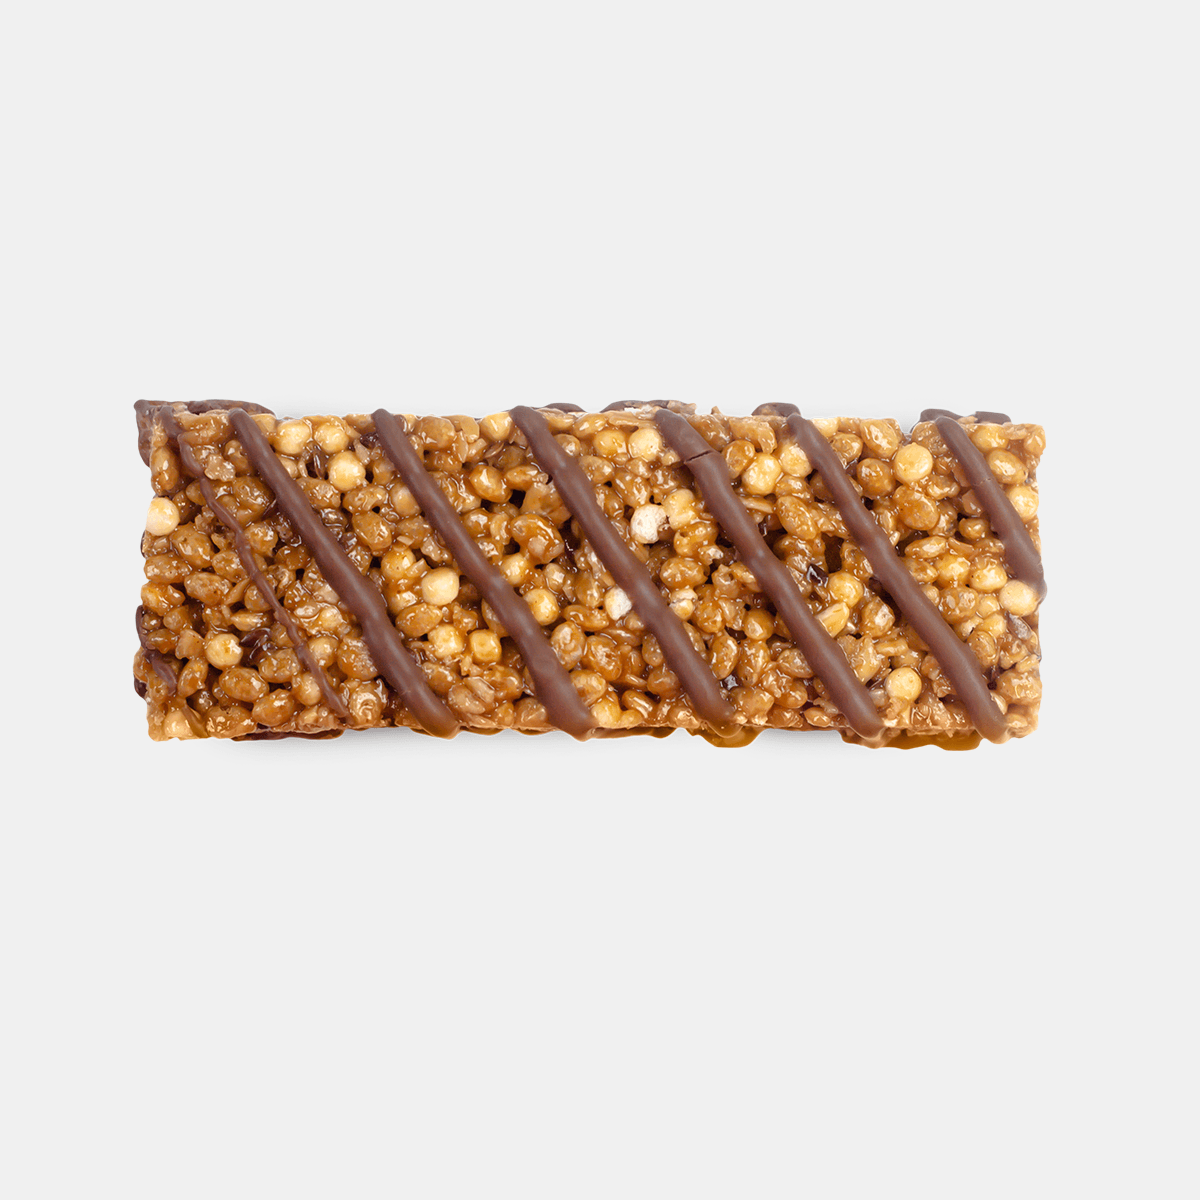 Ready Chocolate Peanut Butter Flavored Clean Protein Bars - 5 oz